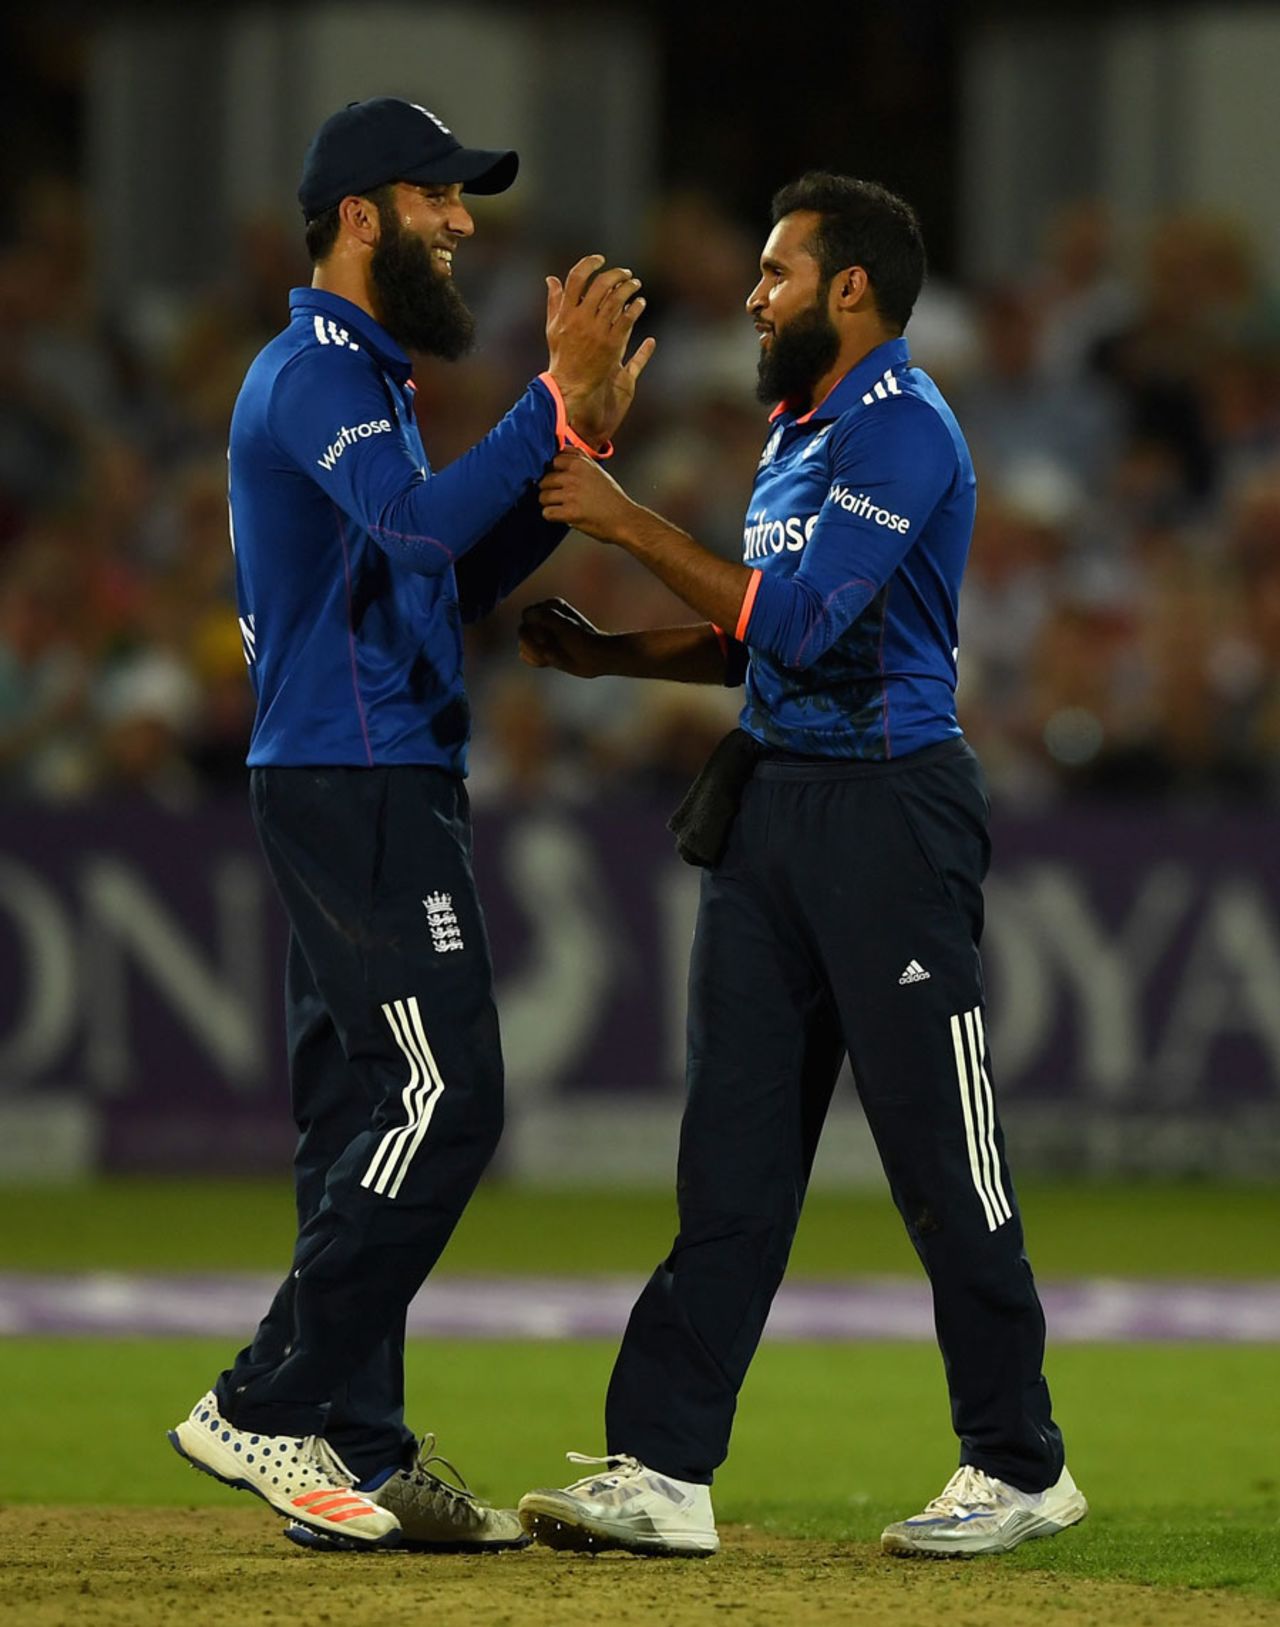 Moeen Ali and Adil Rashid chipped in with three wickets between them, England v Pakistan, 3rd ODI, Trent Bridge, August 30, 2016